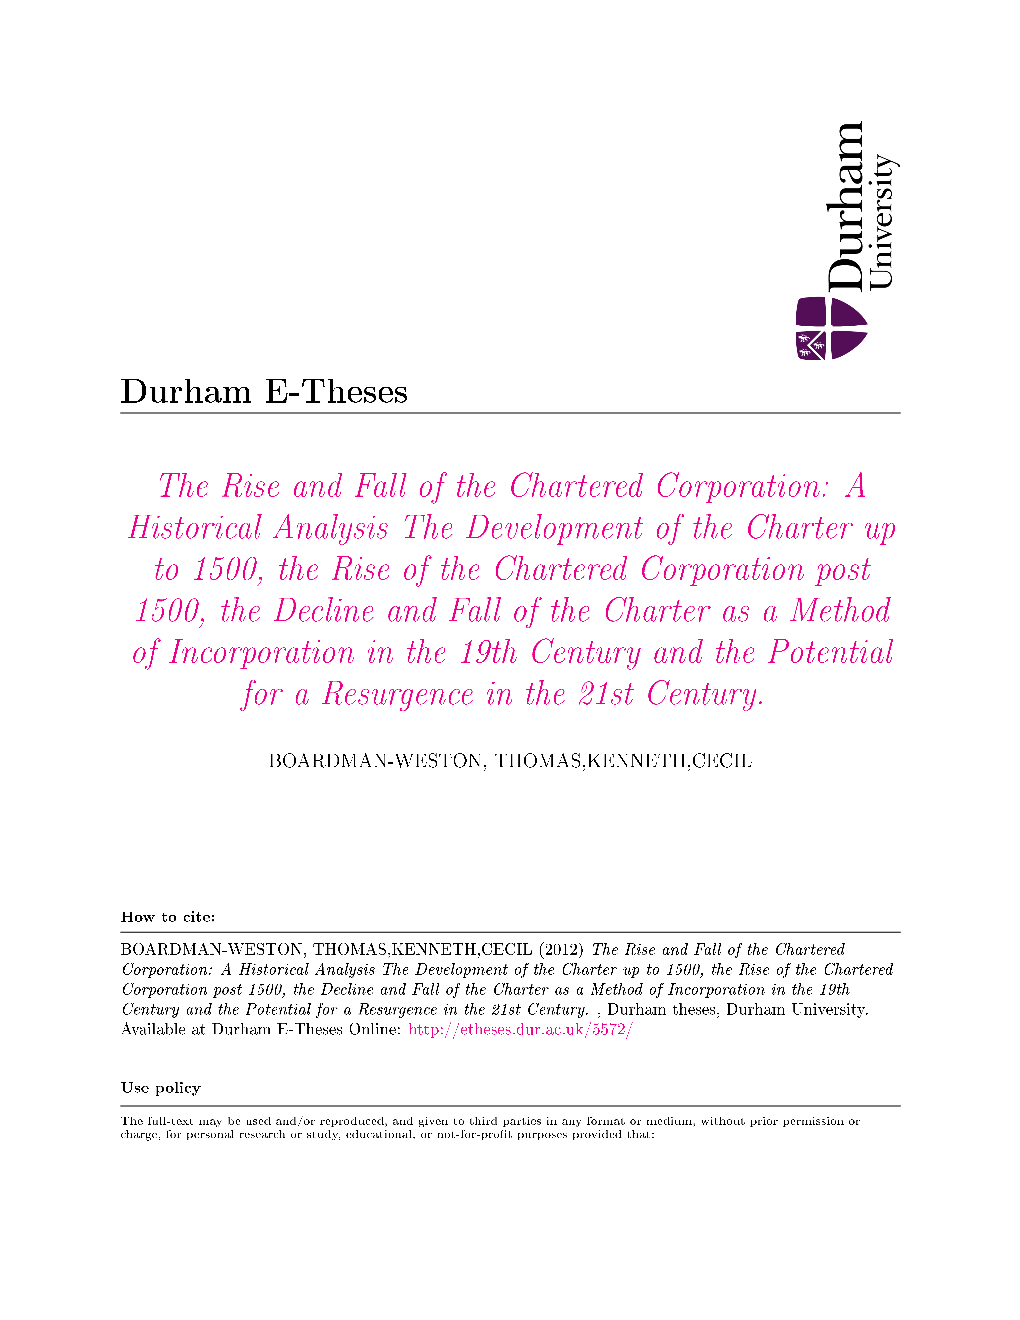 The Rise and Fall of the Chartered Corporation